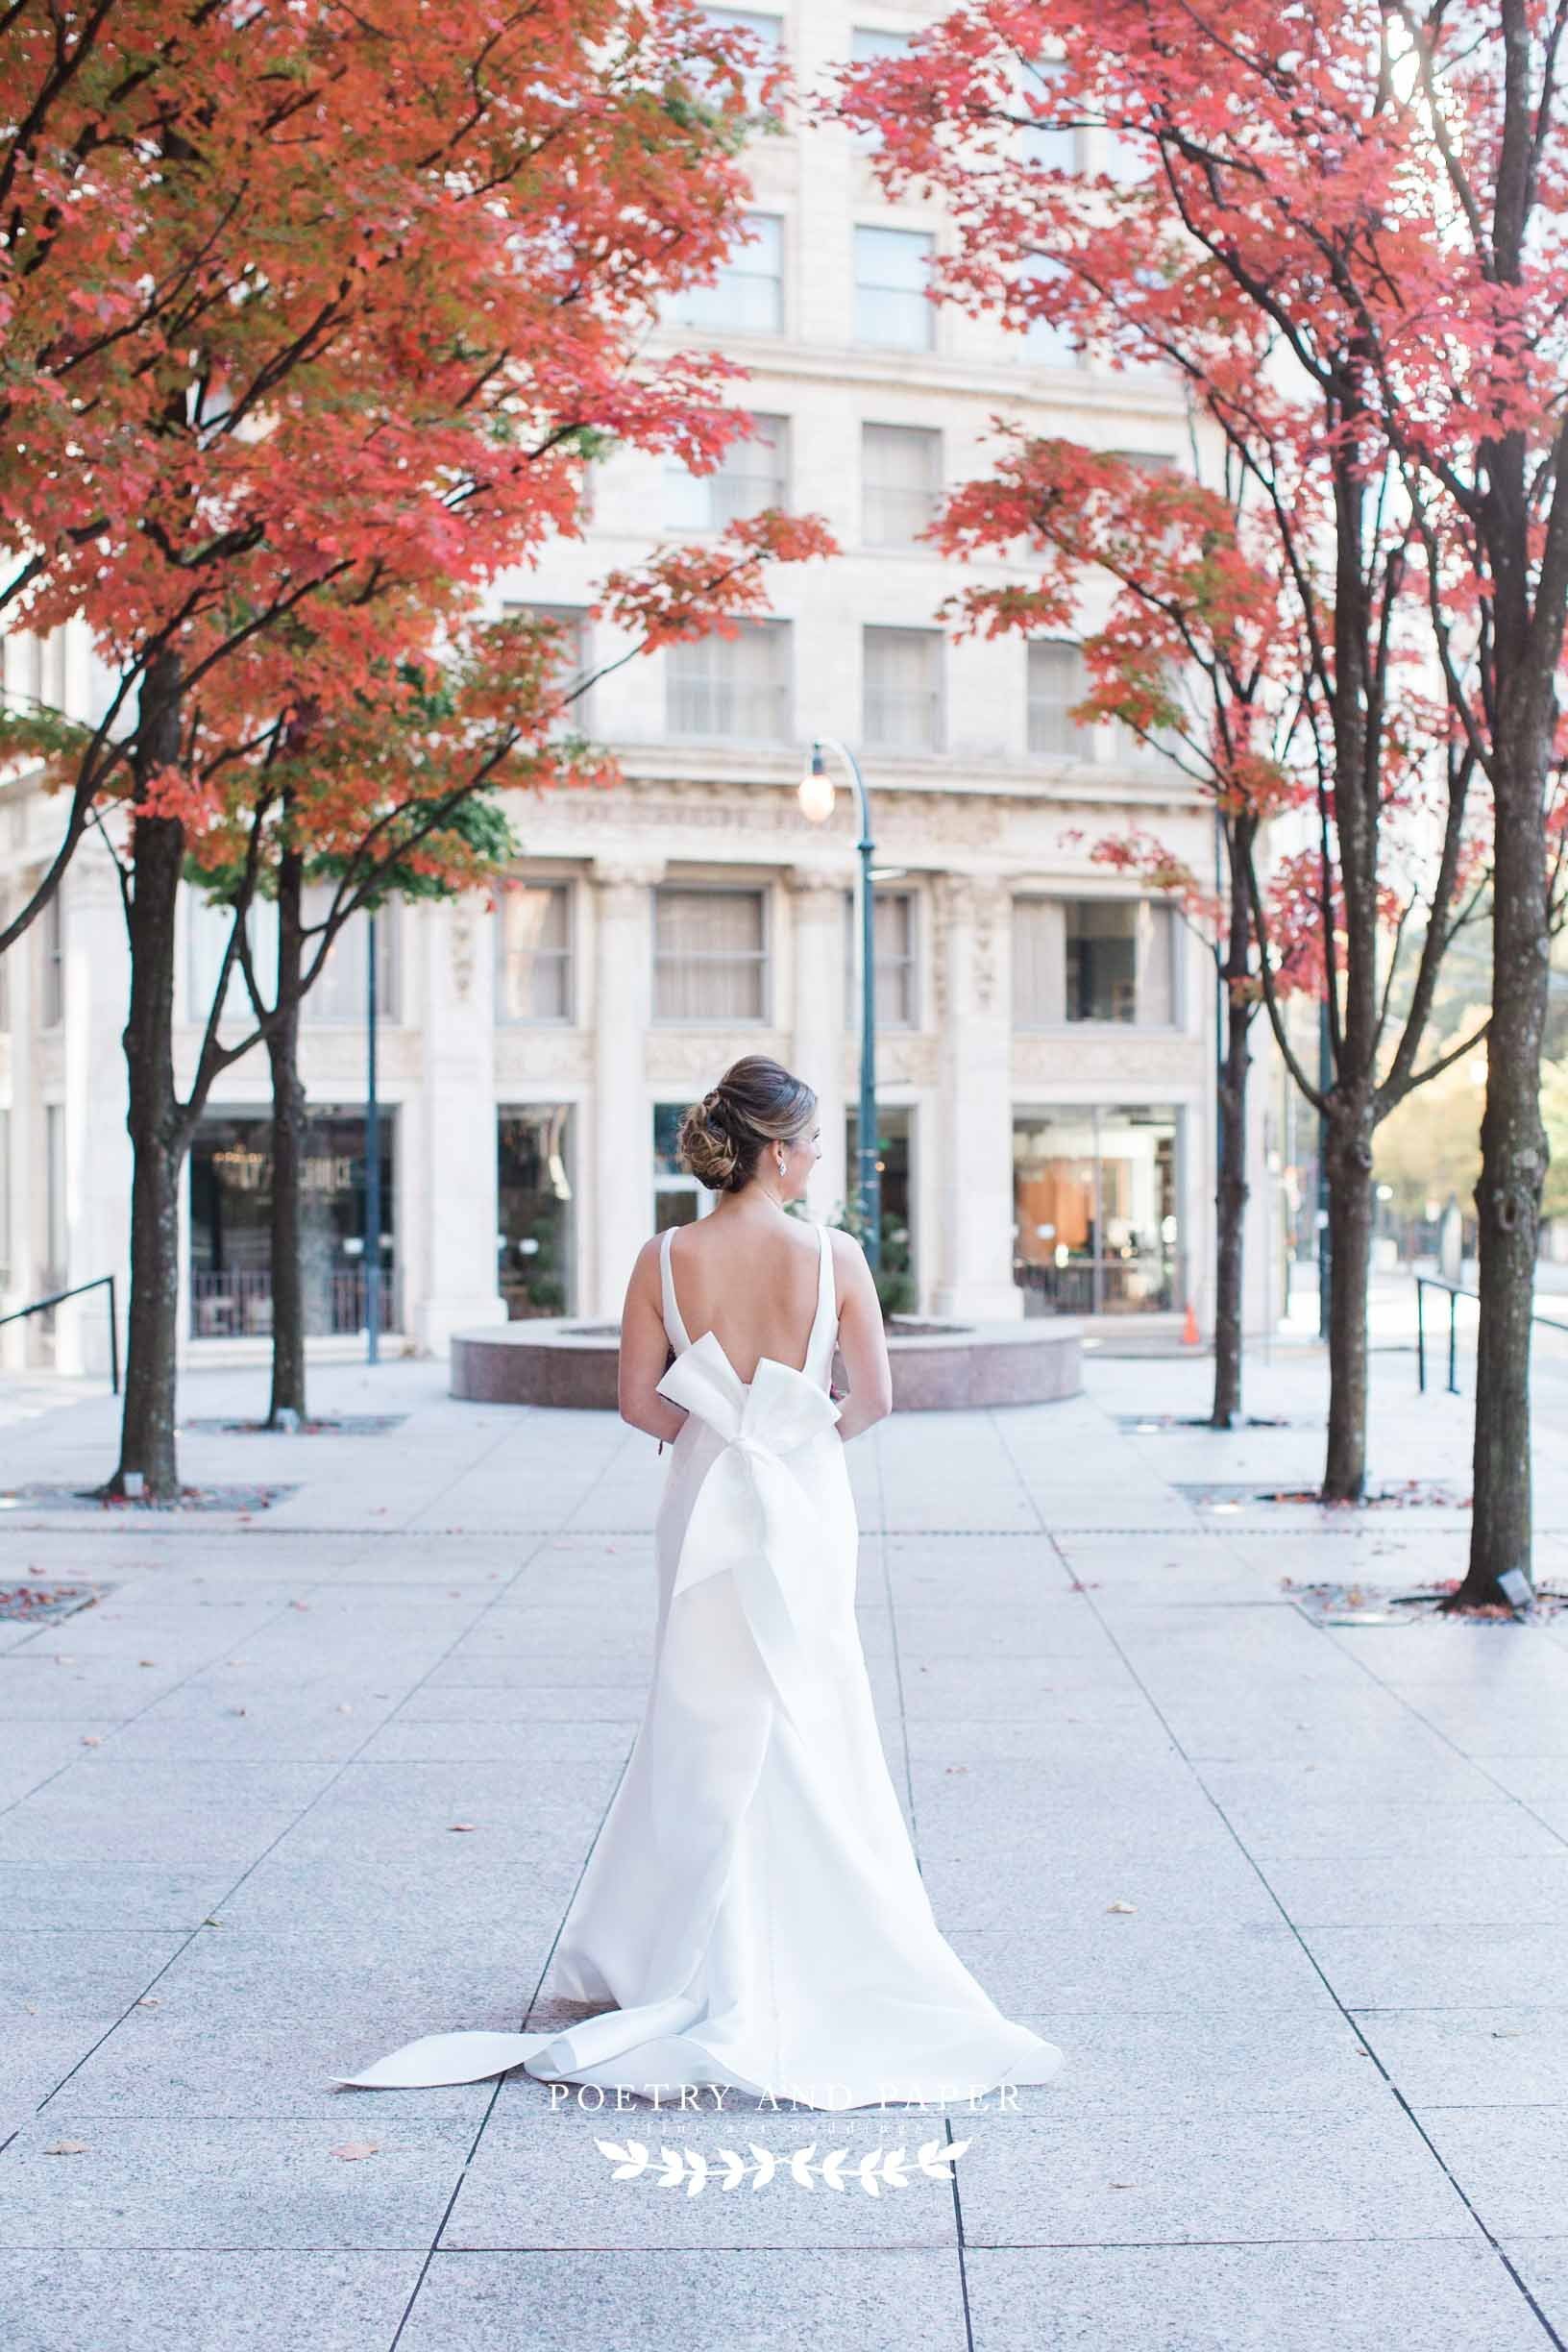 Top Destination Wedding Photographer- Timeless- Poetry and Paper- Dawn Johnson- midtown atlanta bride in gown with gorgeous low back.jpg